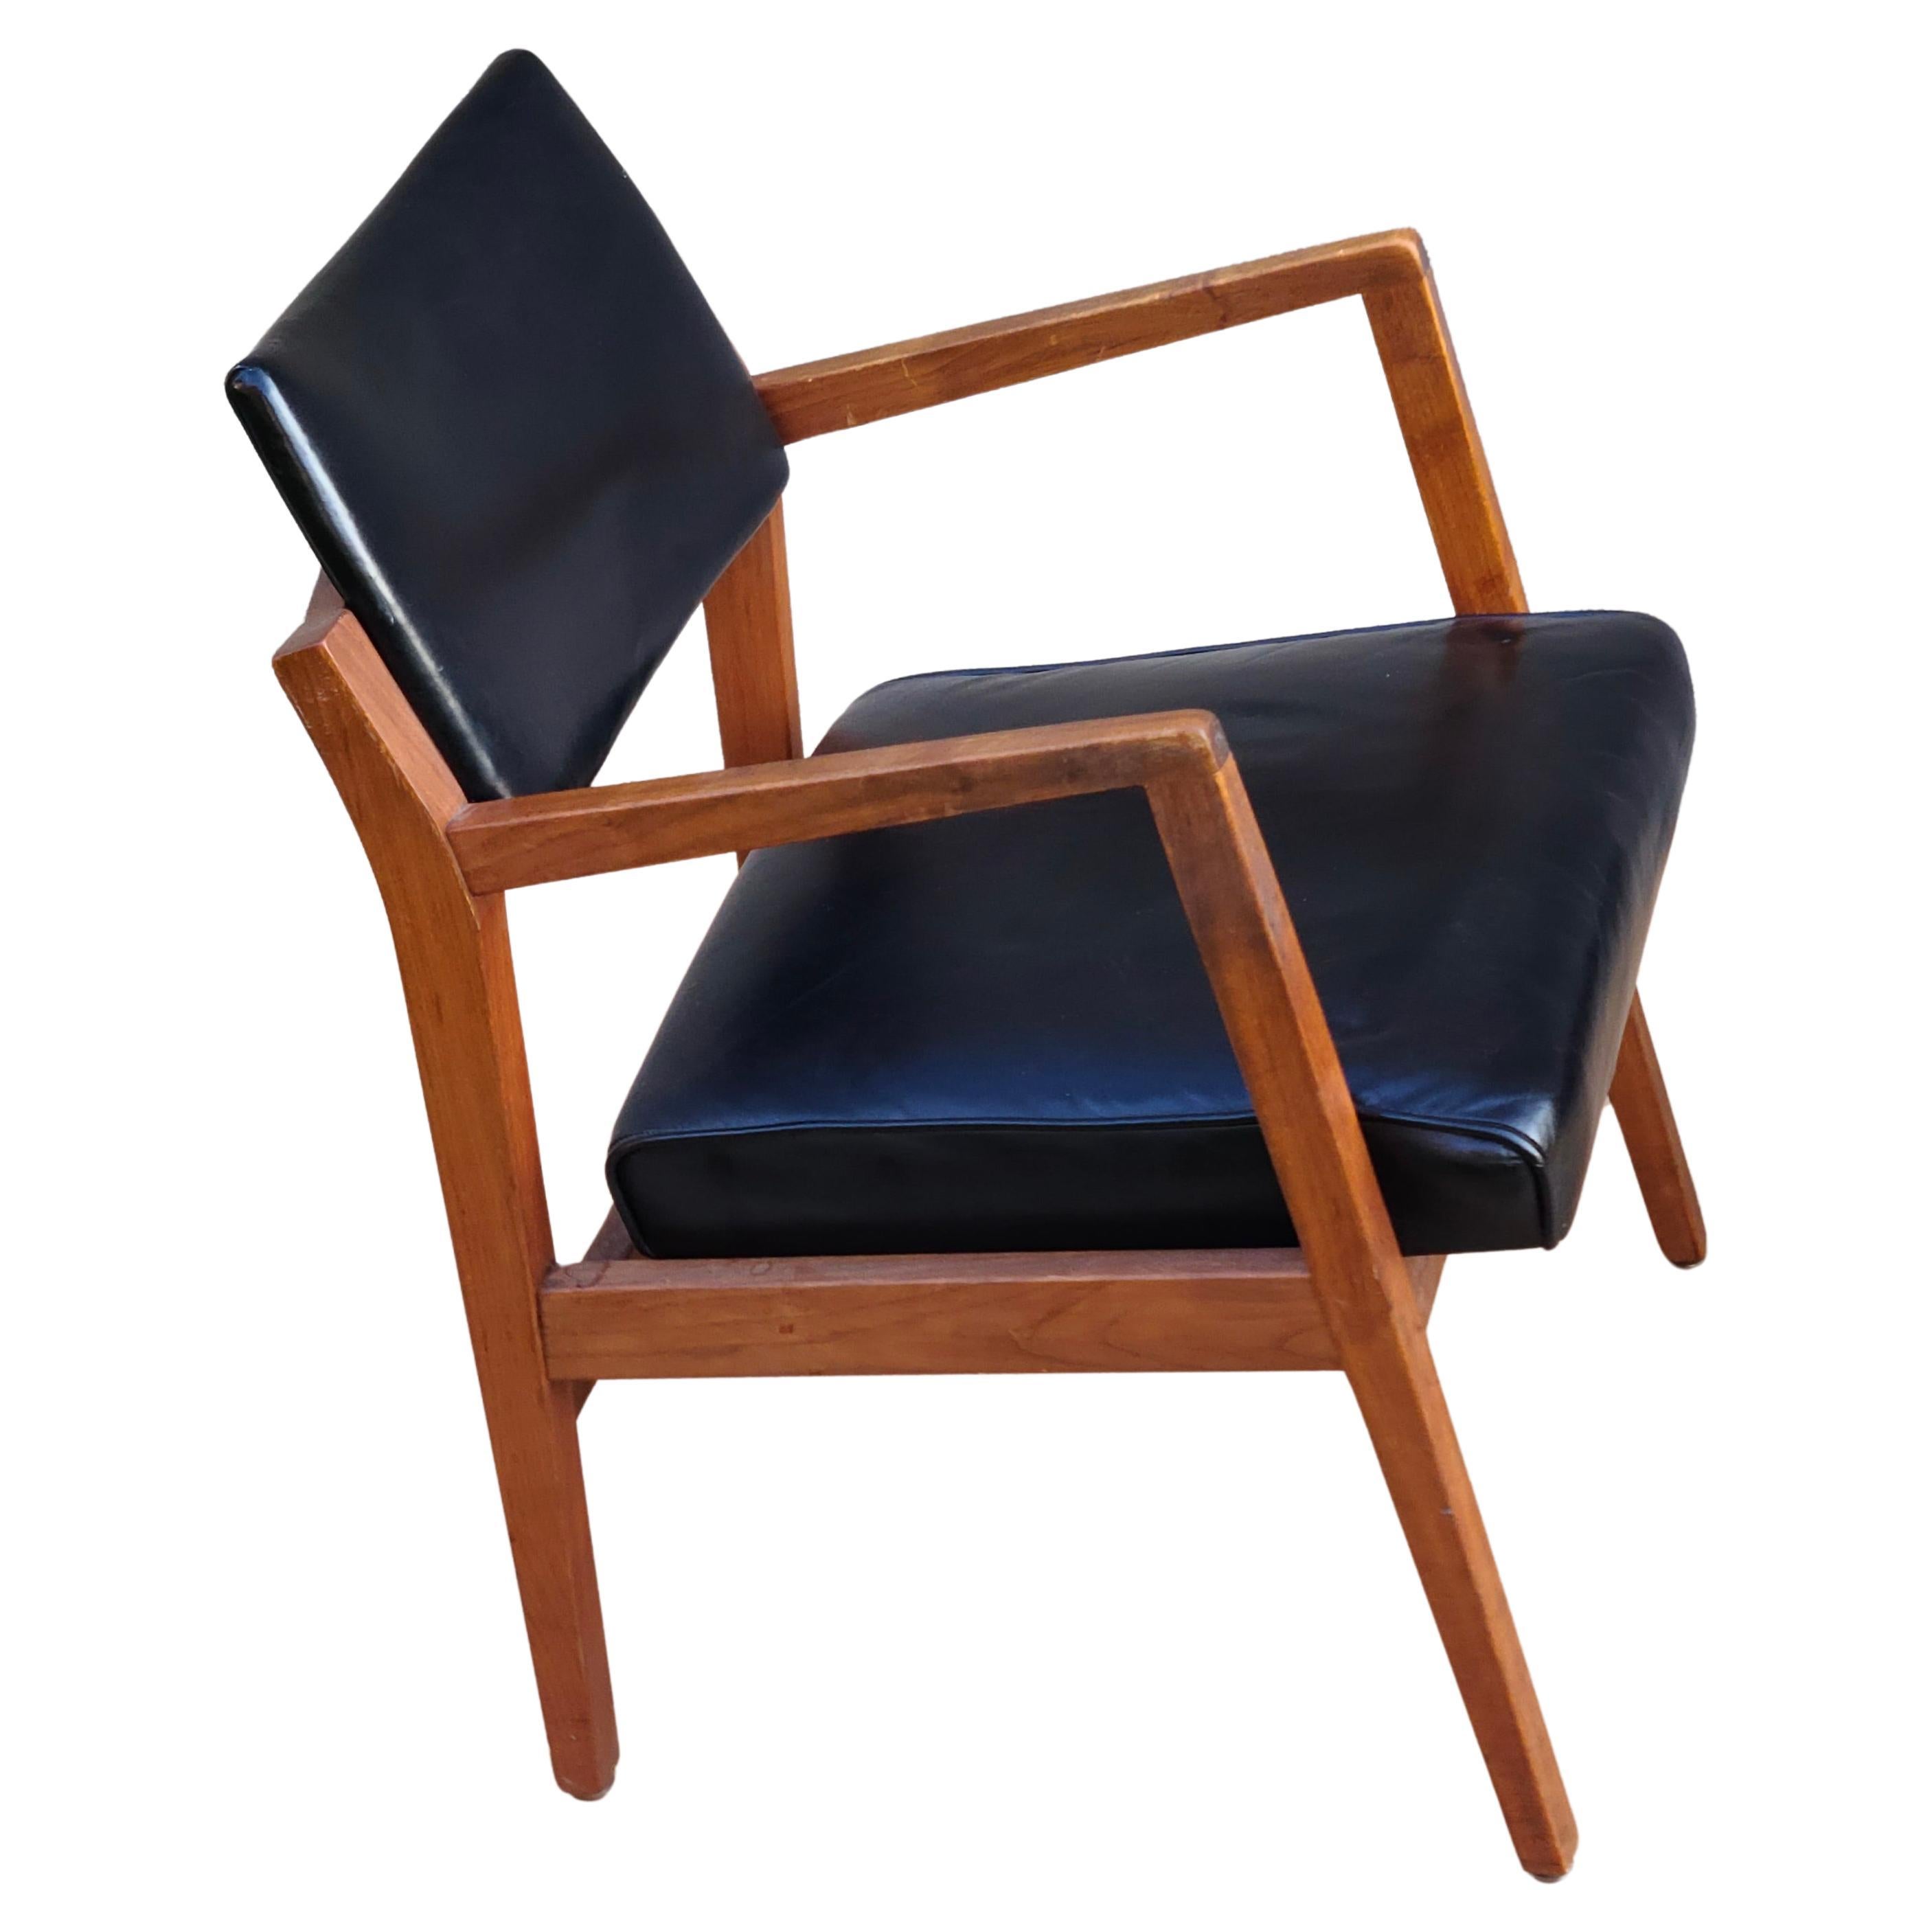 Set of 12 Arm Chairs by Jens Risom.
Walnut Frames. Vintage Leather seat and backrest.

